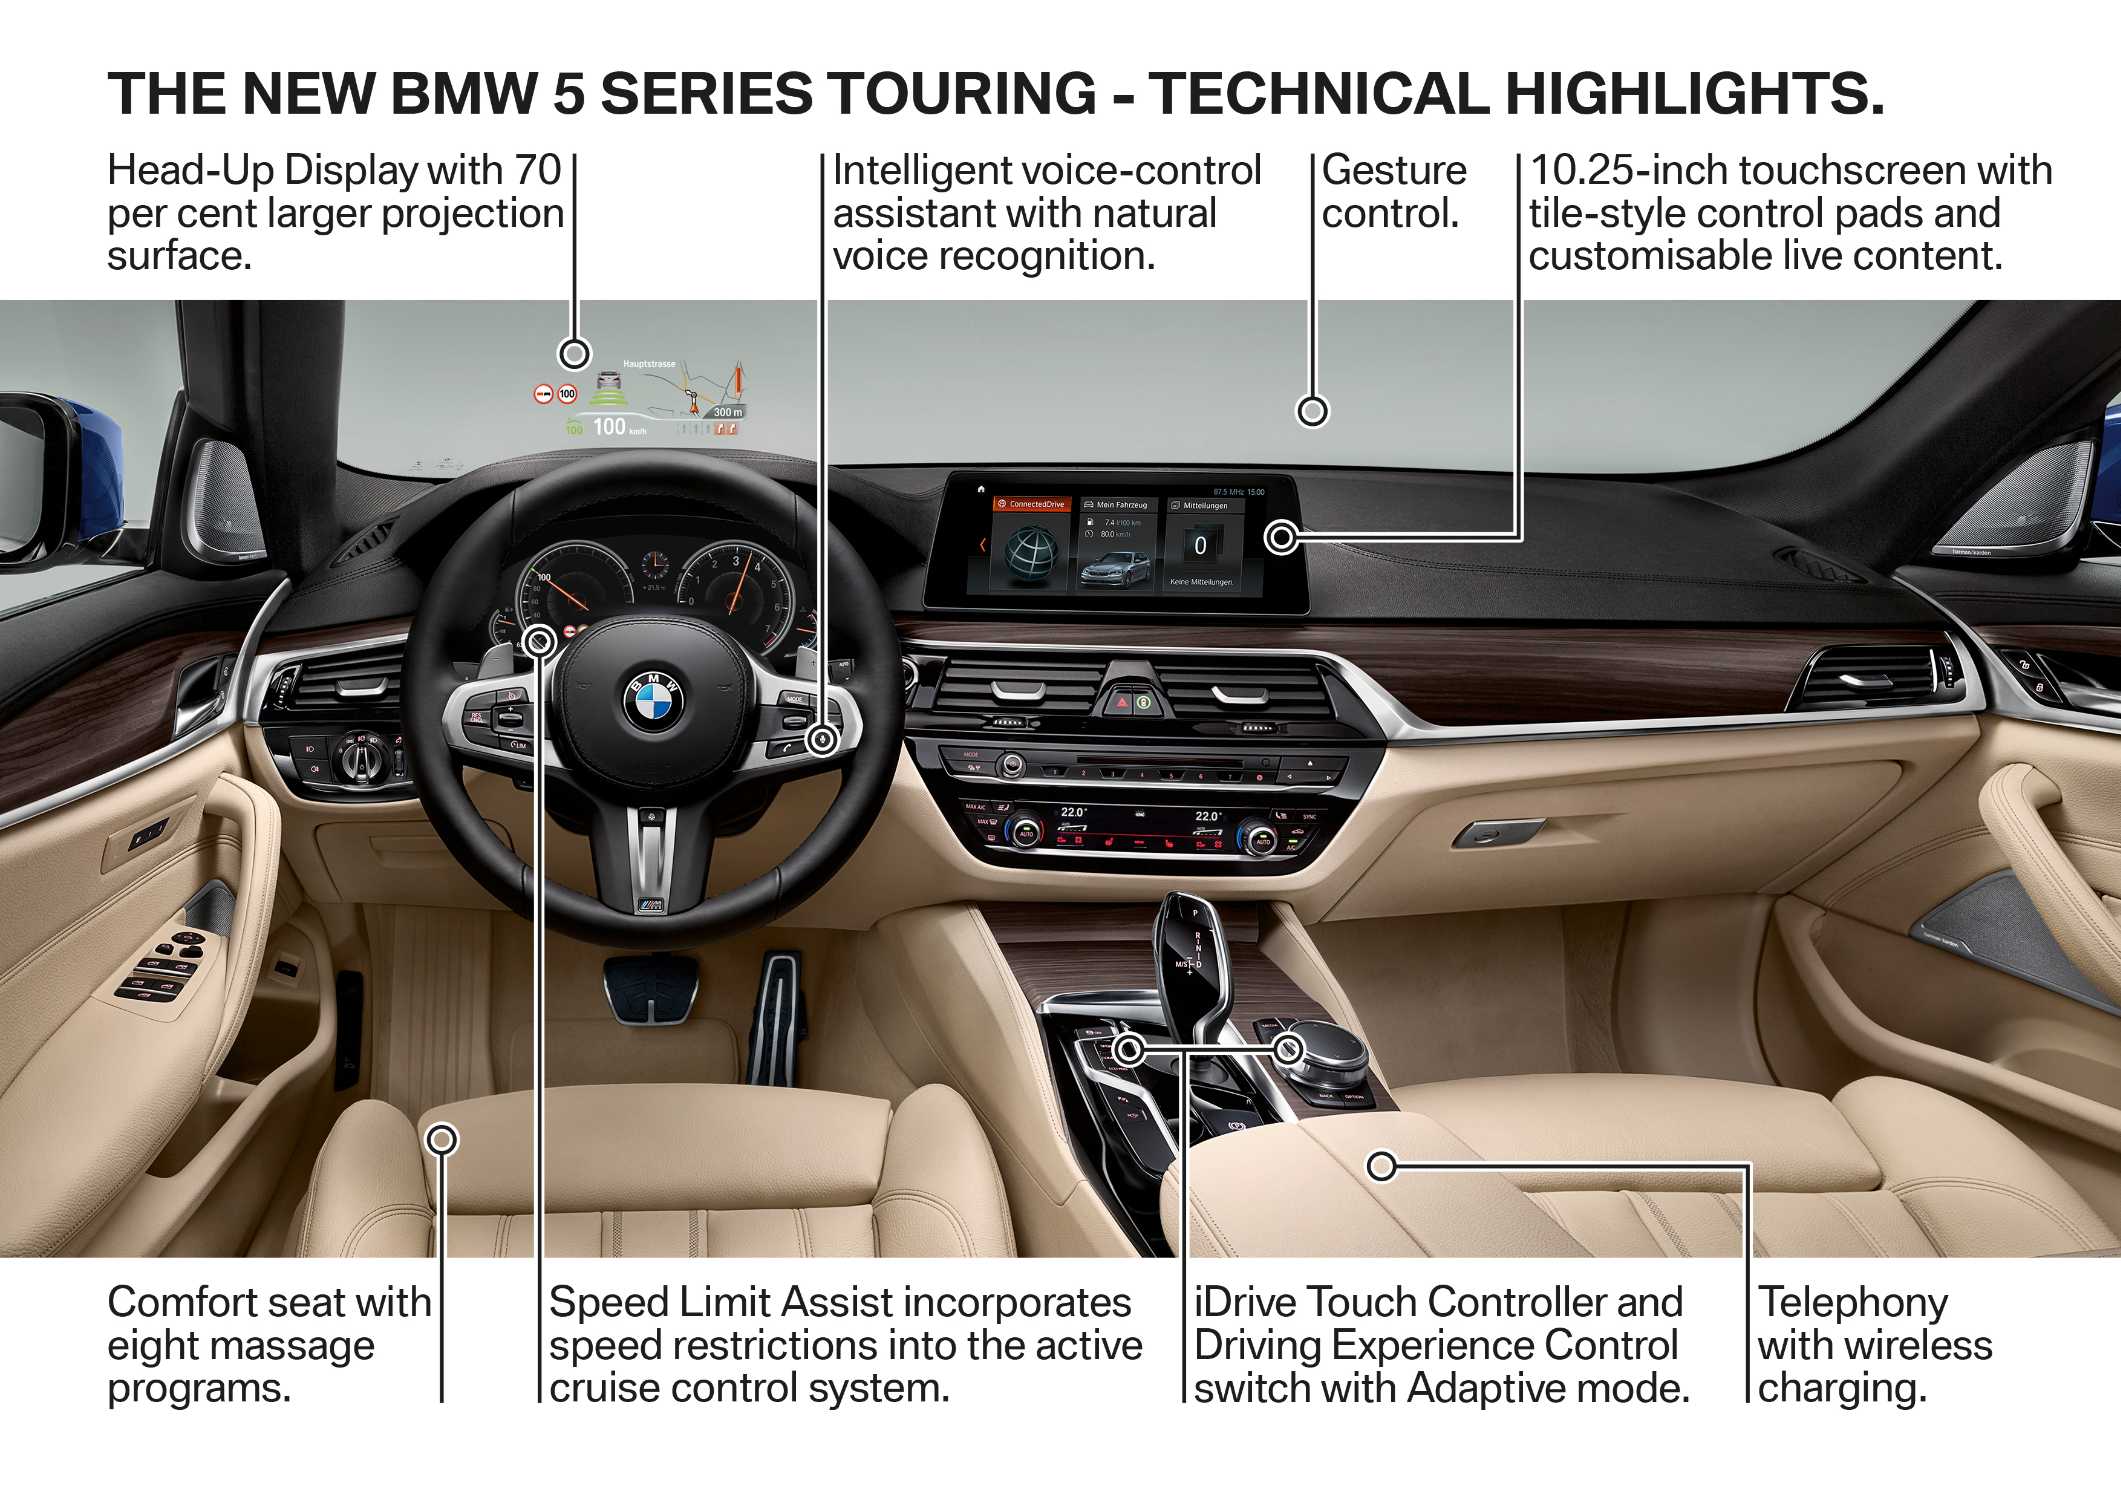 The new BMW 5 Series Touring; BMW 530d xDrive Touring (02/2017).